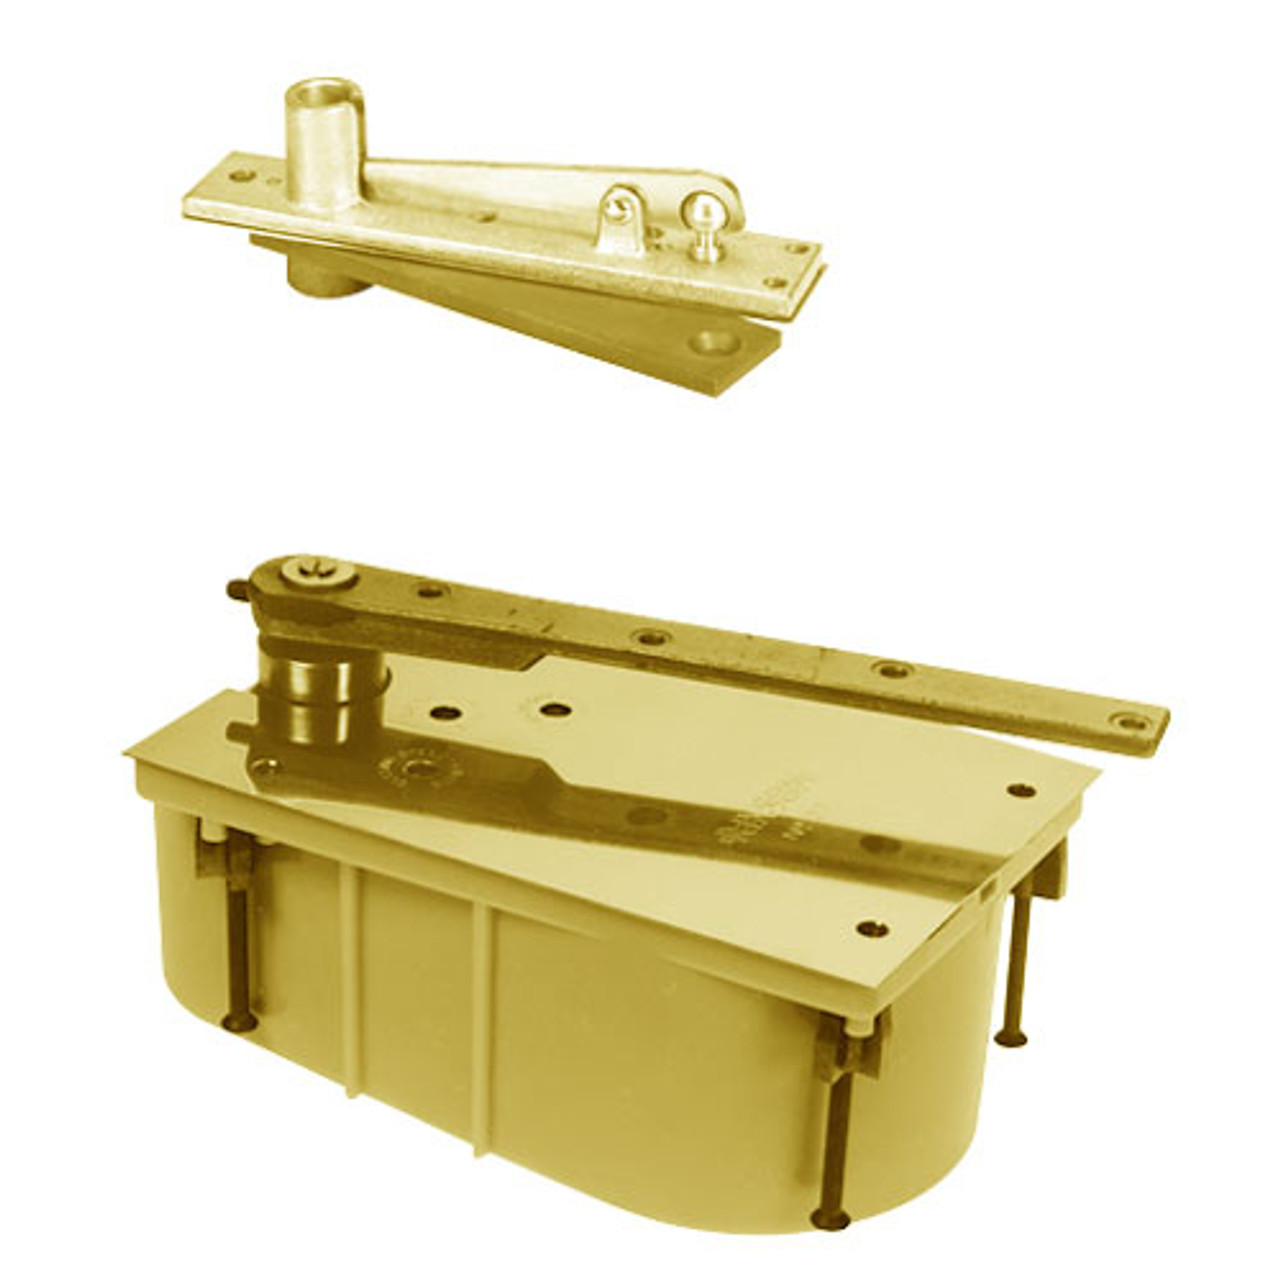 28-90S-554-LTP-LH-605 Rixson 28 Series Heavy Duty Single Acting Center Hung Floor Closer with Concealed Arm in Bright Brass Finish